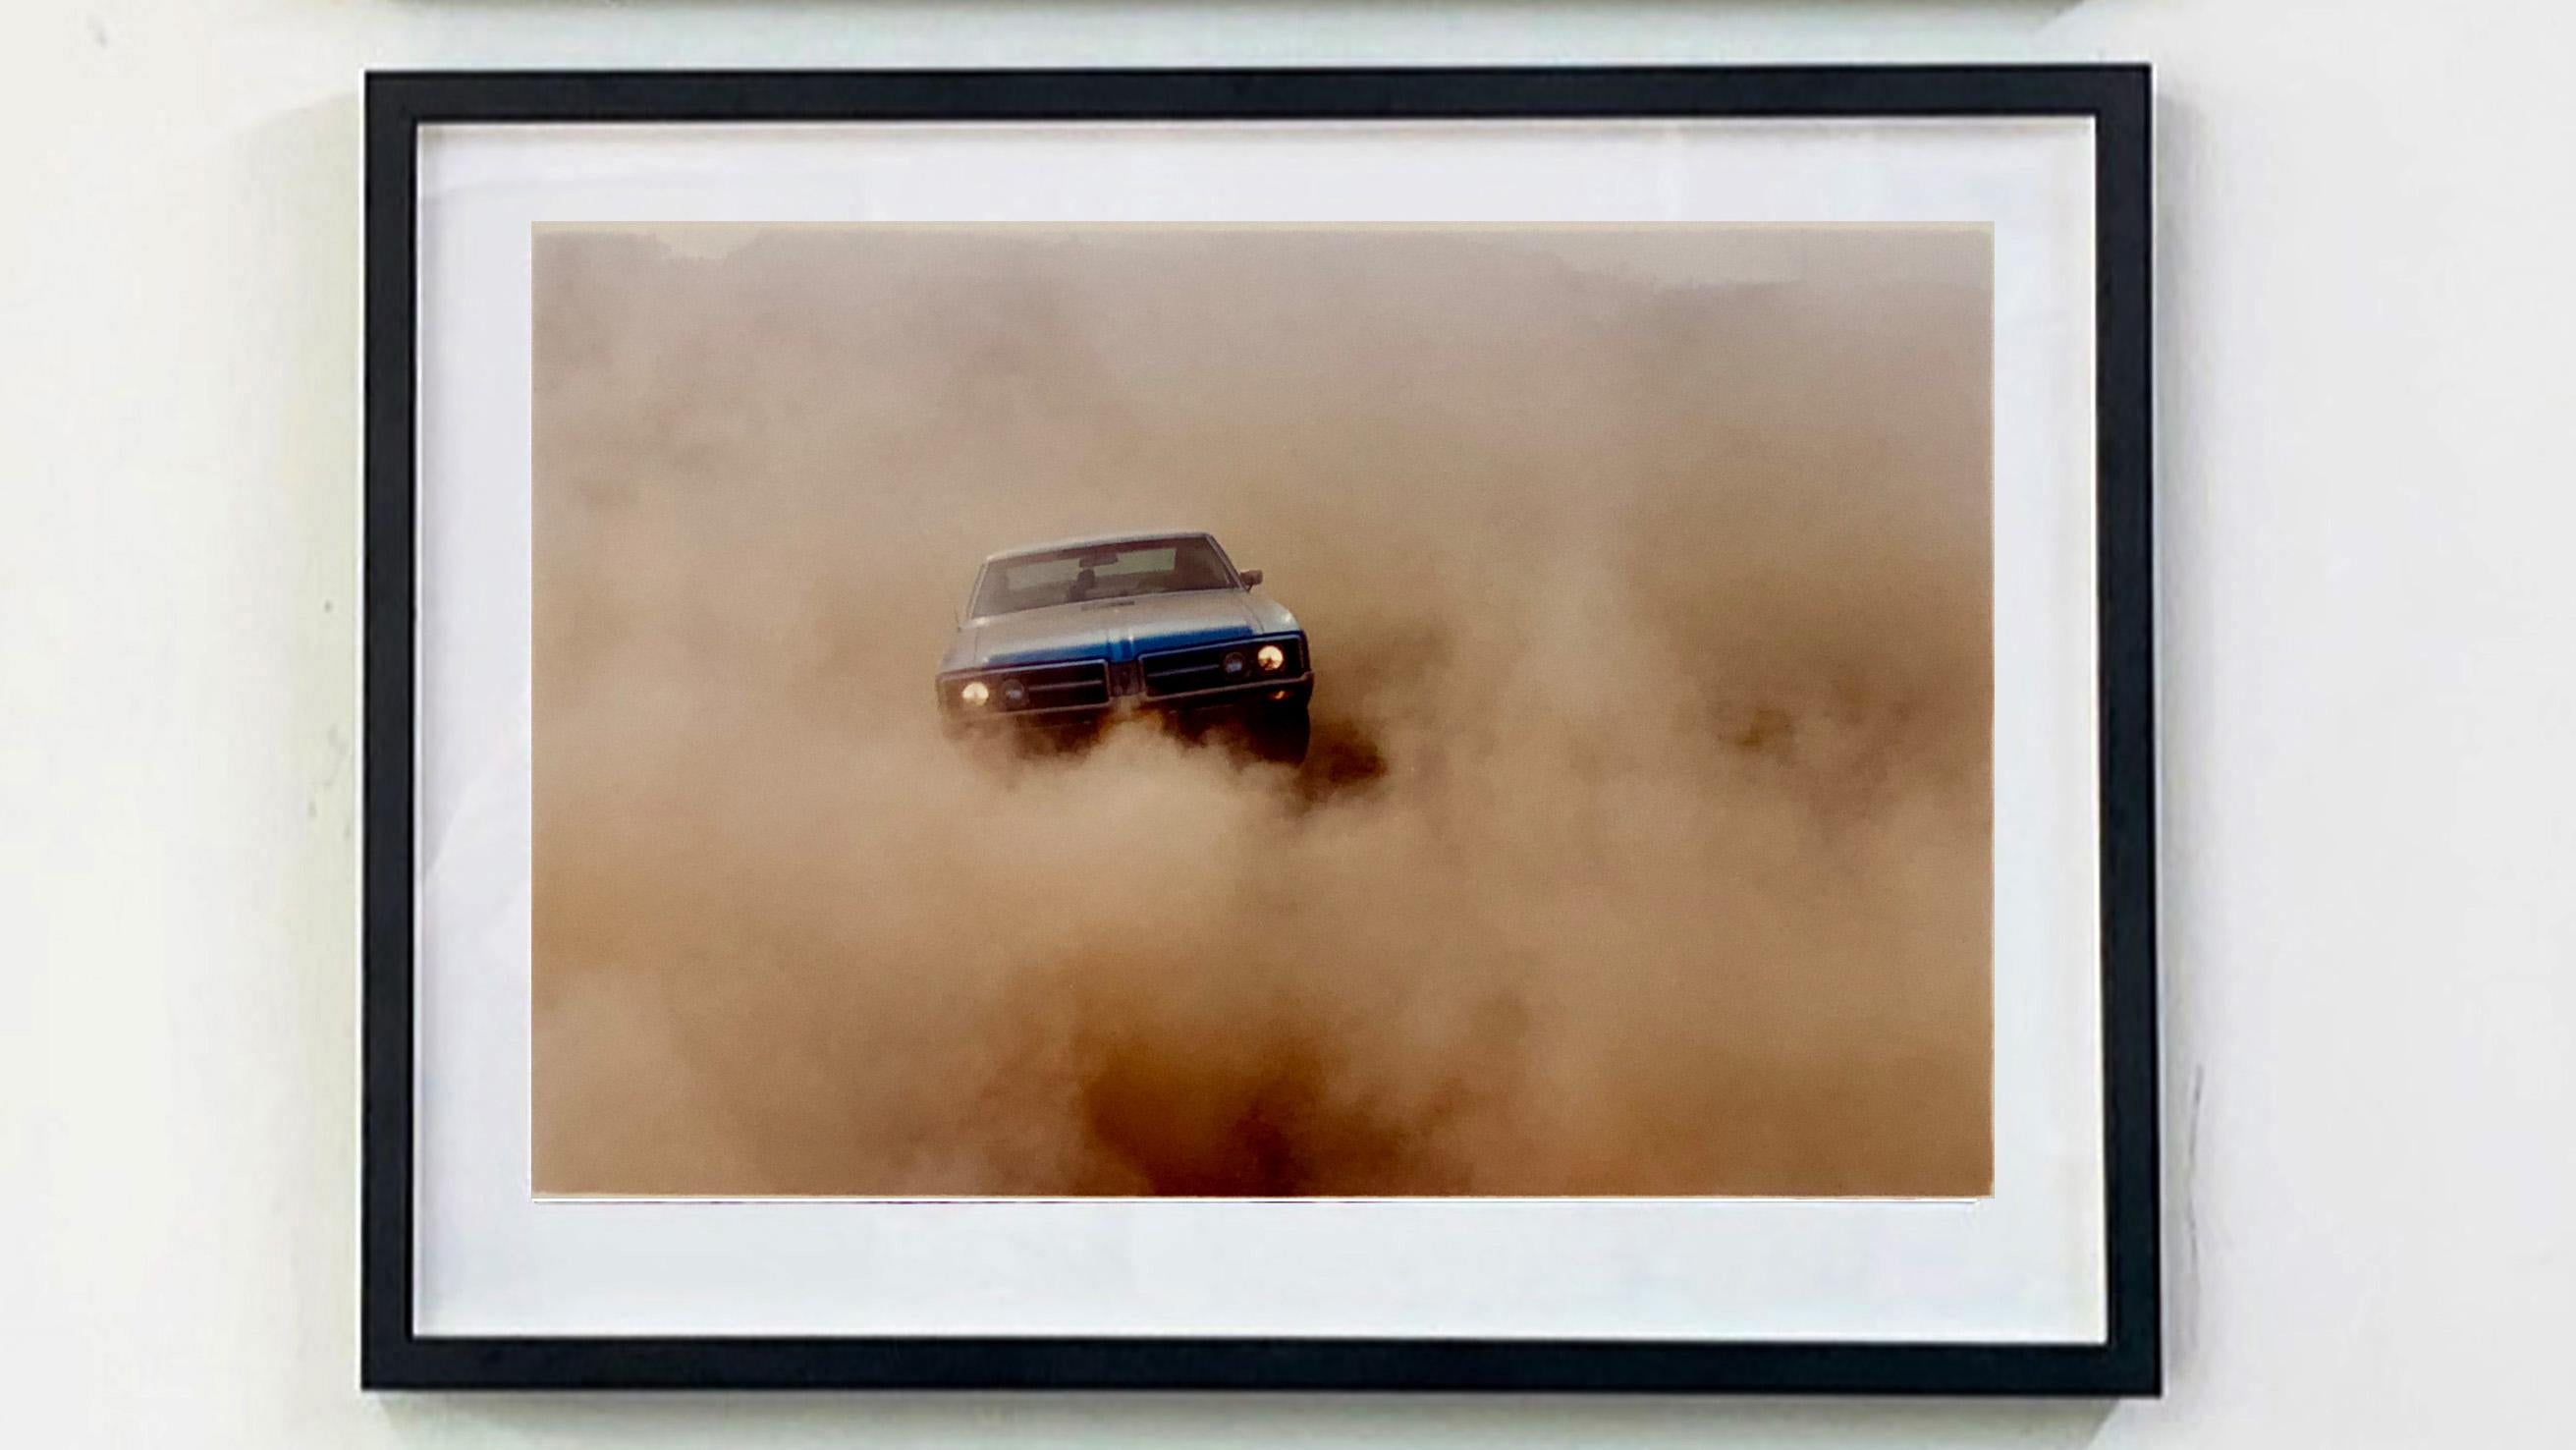 Buick in the Dust, Hemsby, Norfolk - Color Photography Triptych 2